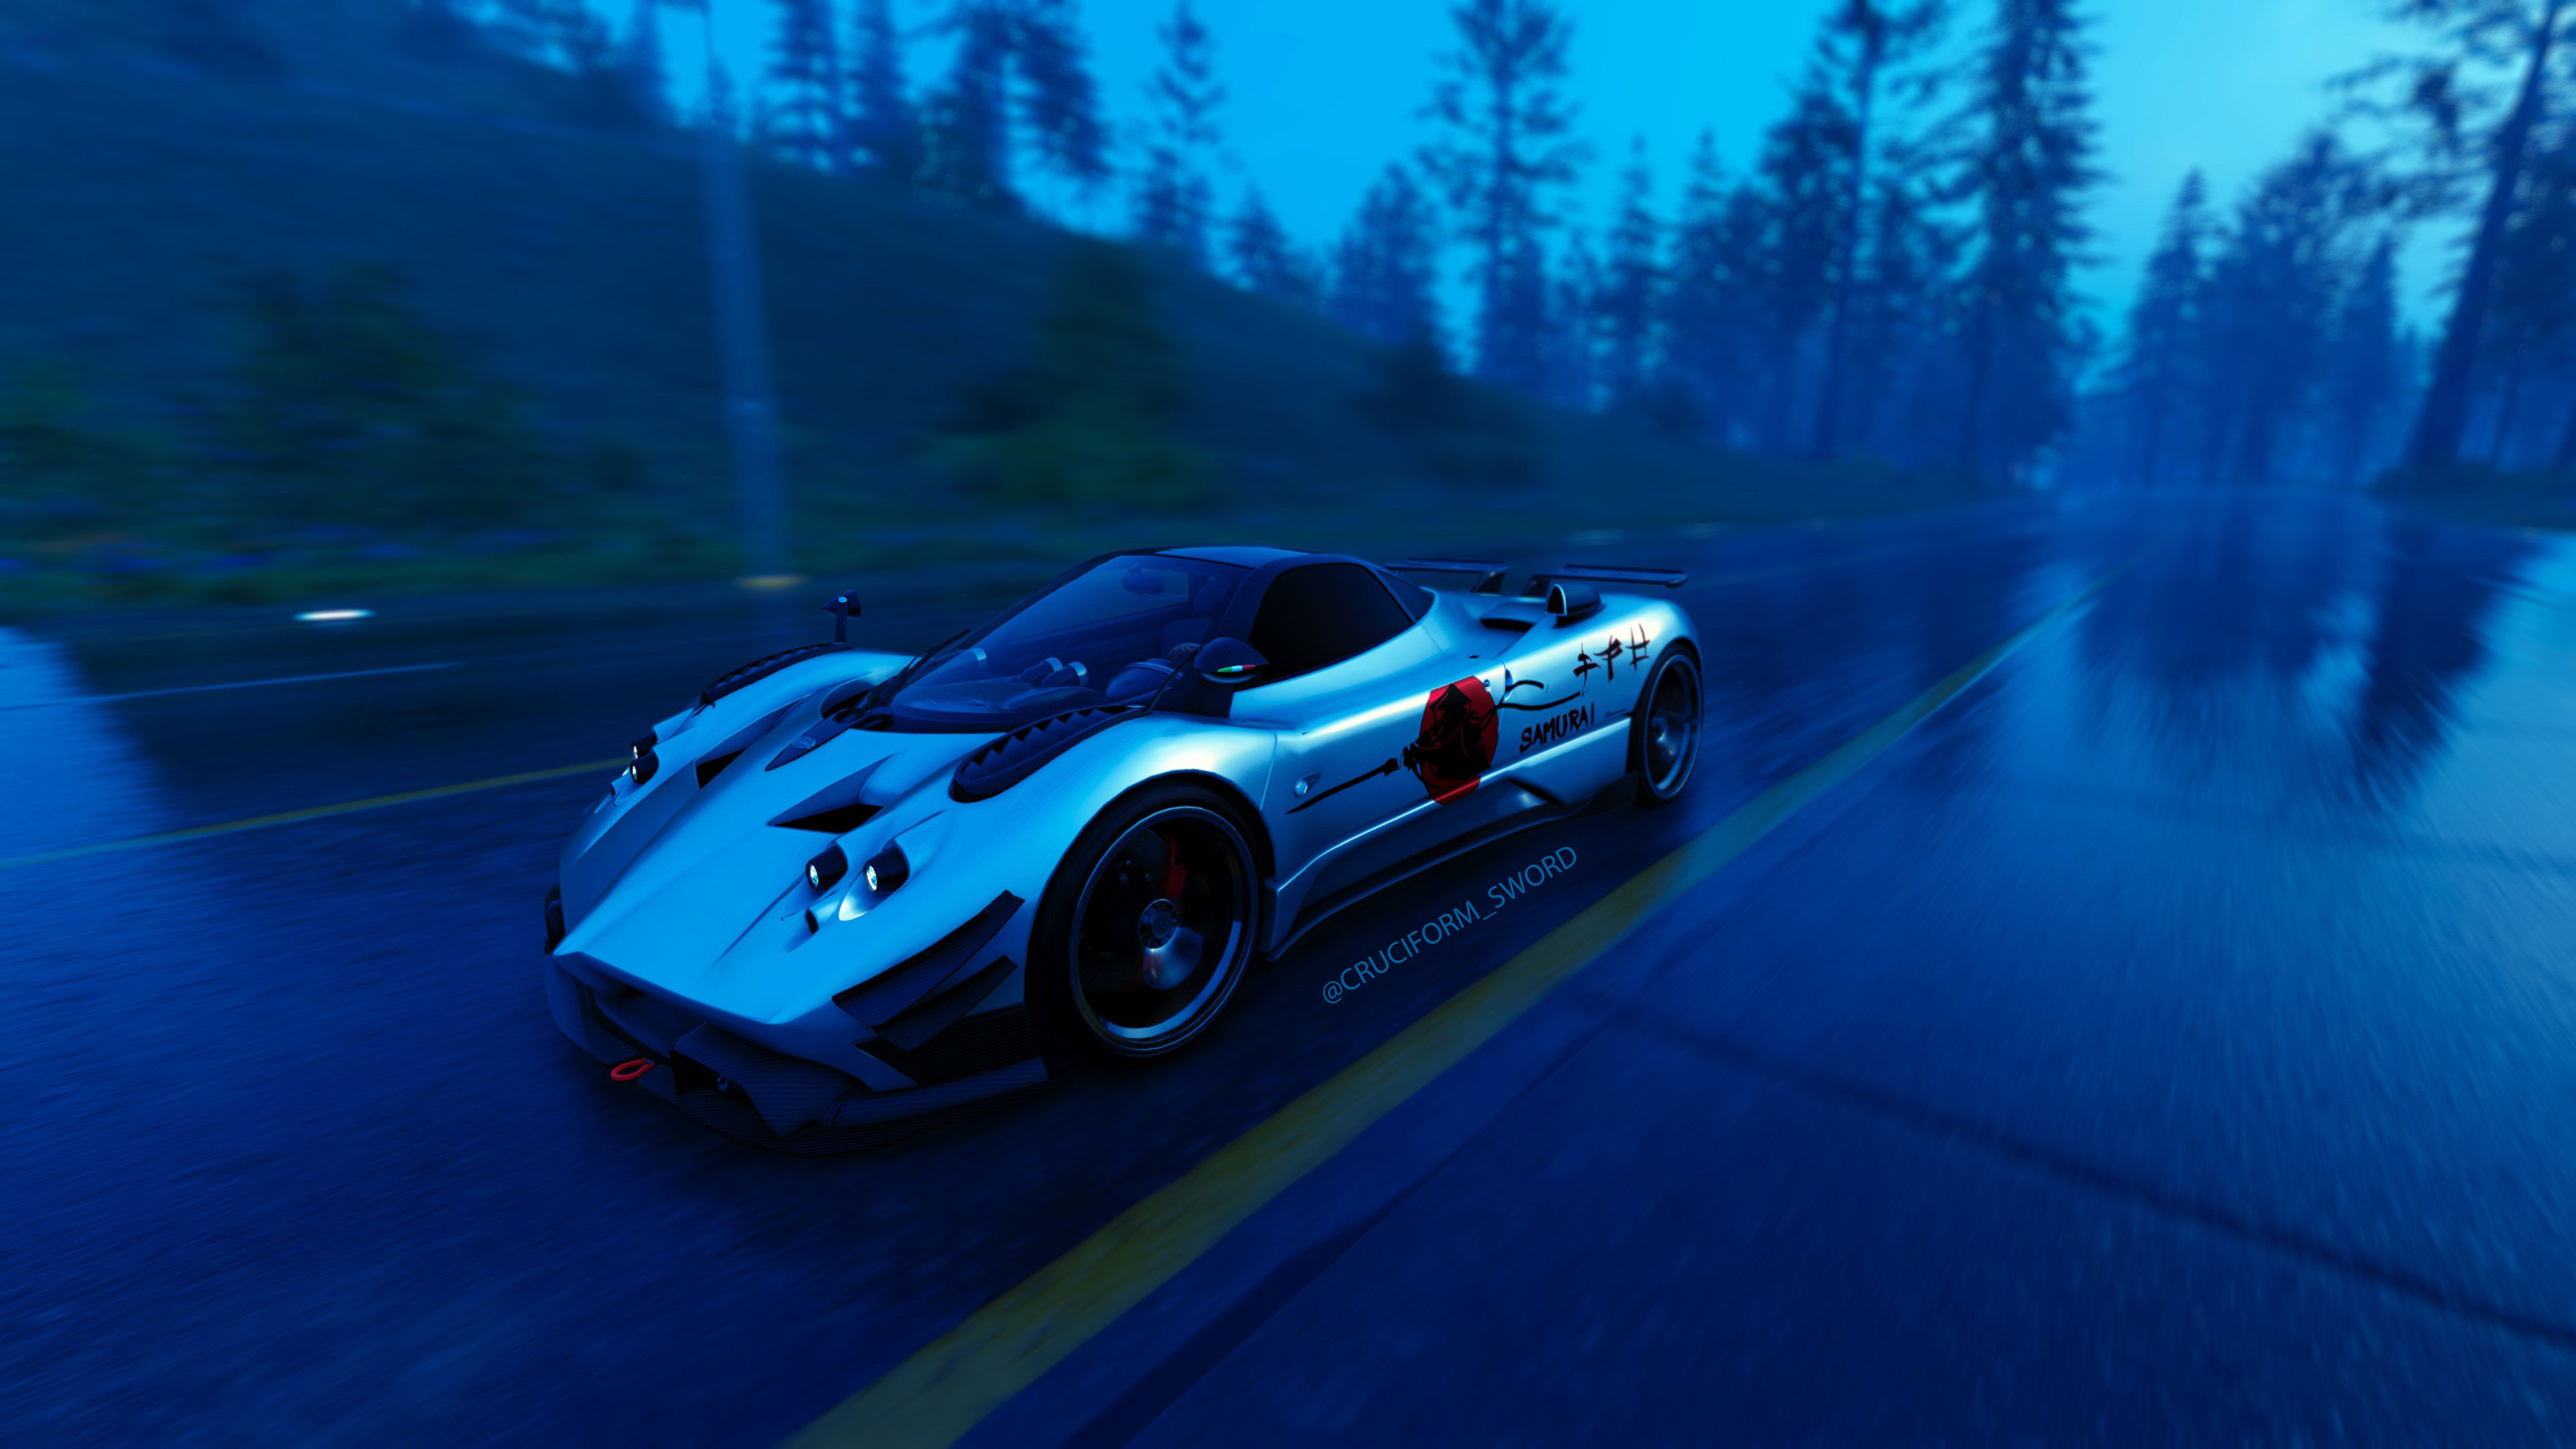 The Crew 2 Pagani Zonda In Game Screen Shot Video Games Game Poster Supercars Sports Car Photography 3840x2160